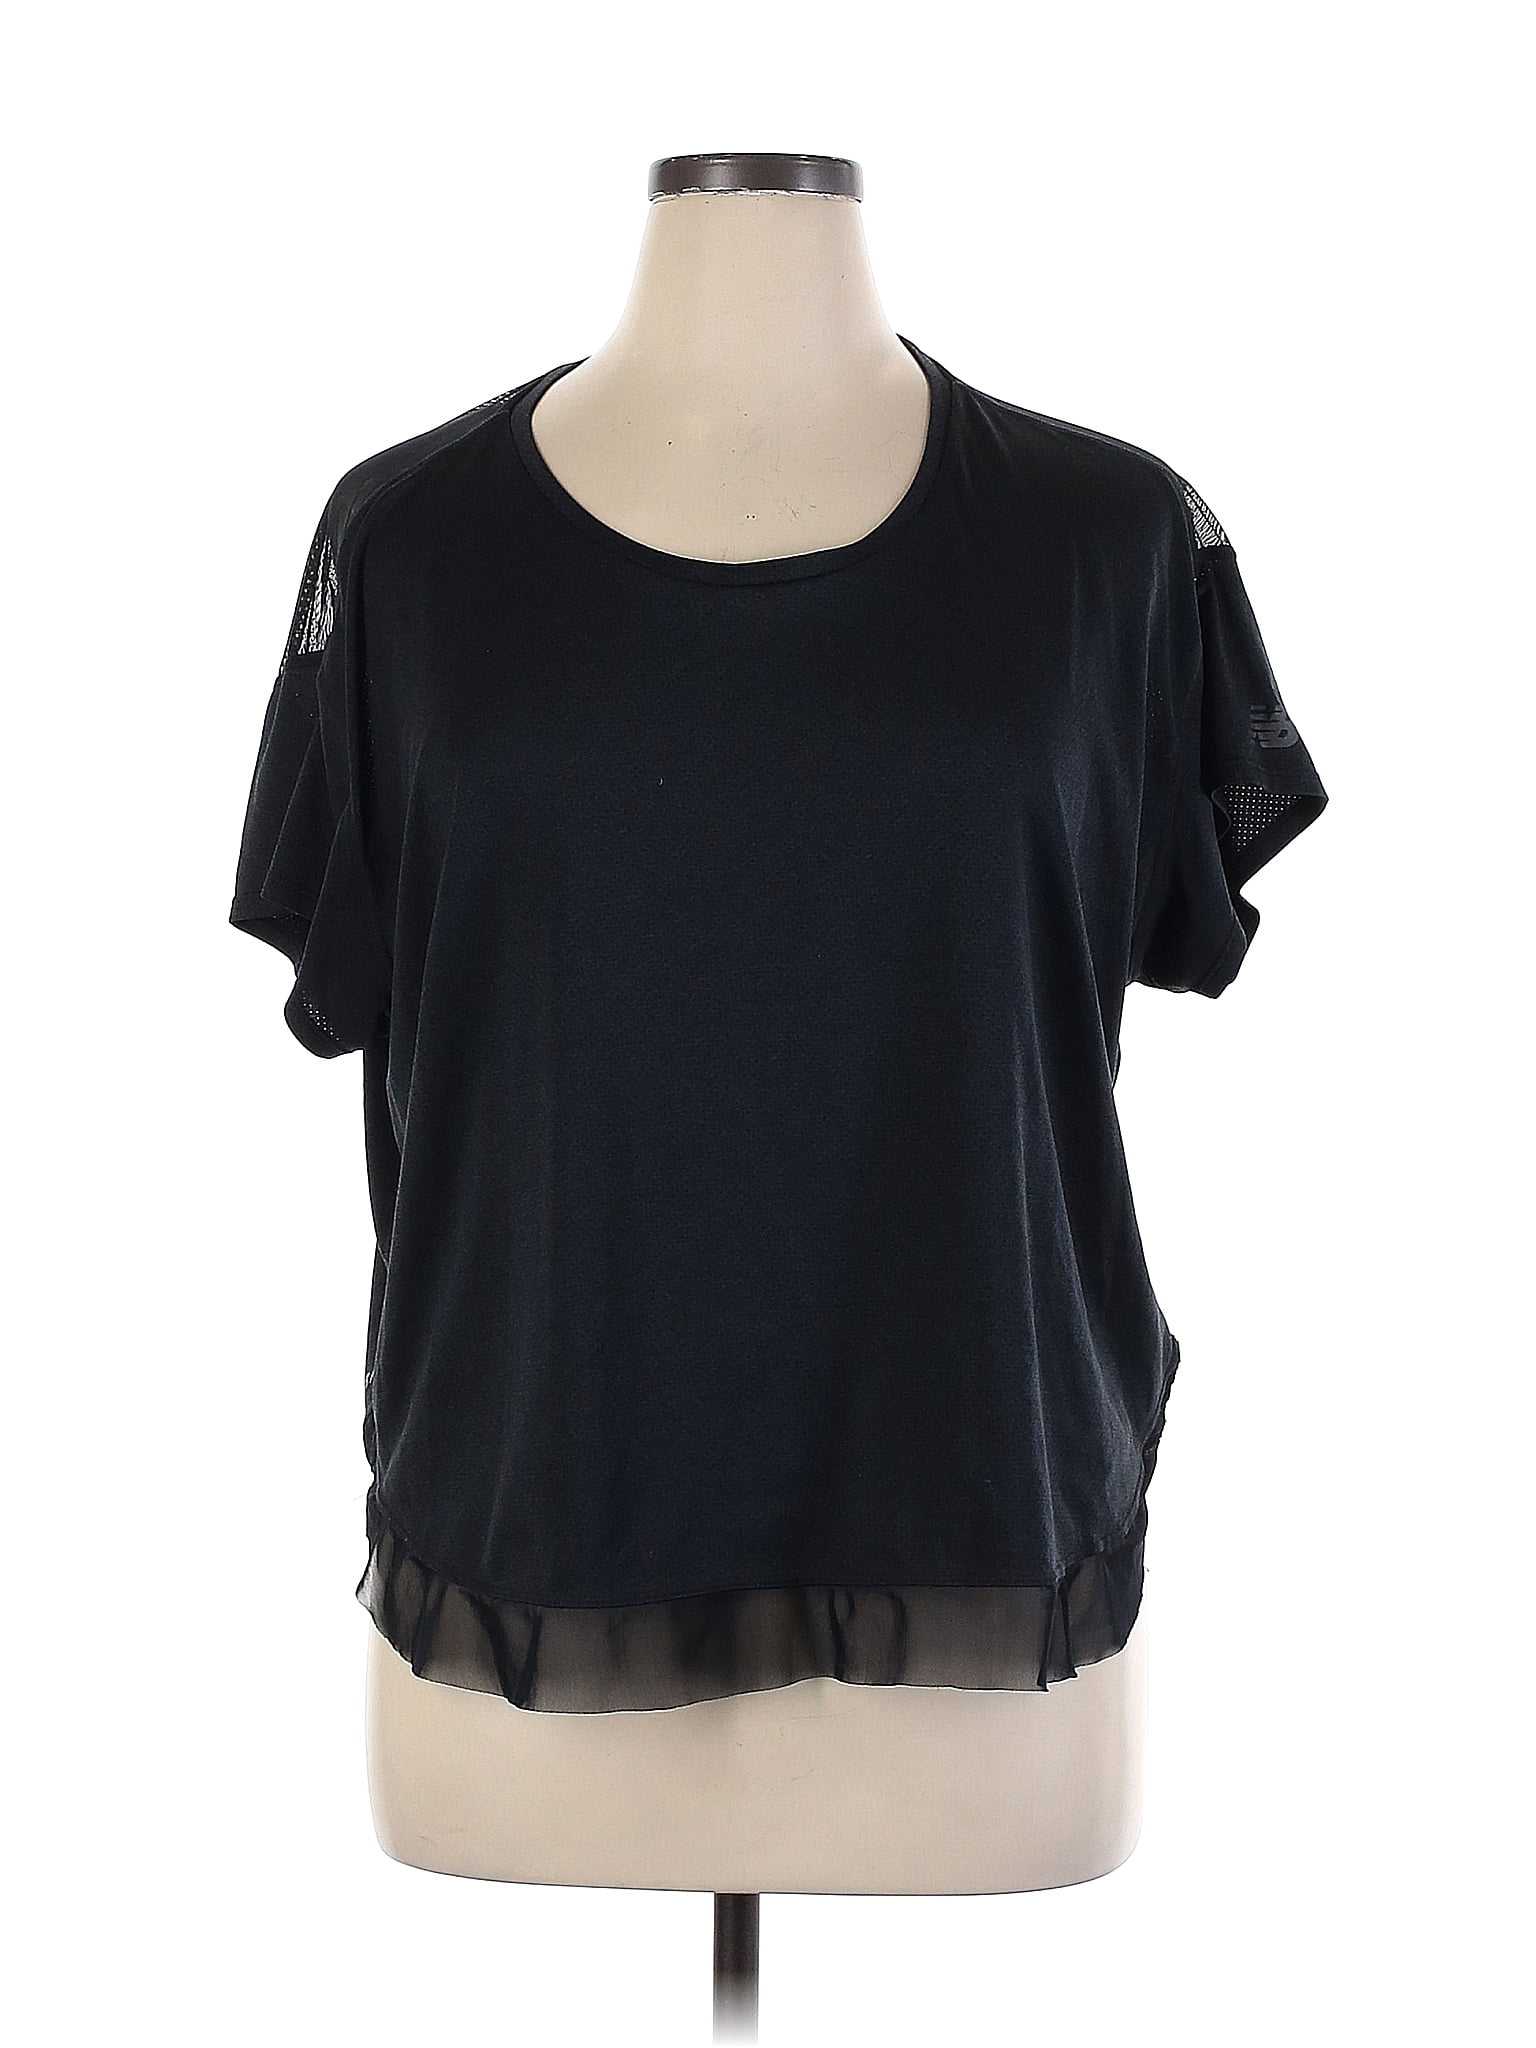 GAIAM Gray Active T-Shirt Size XL - 50% off